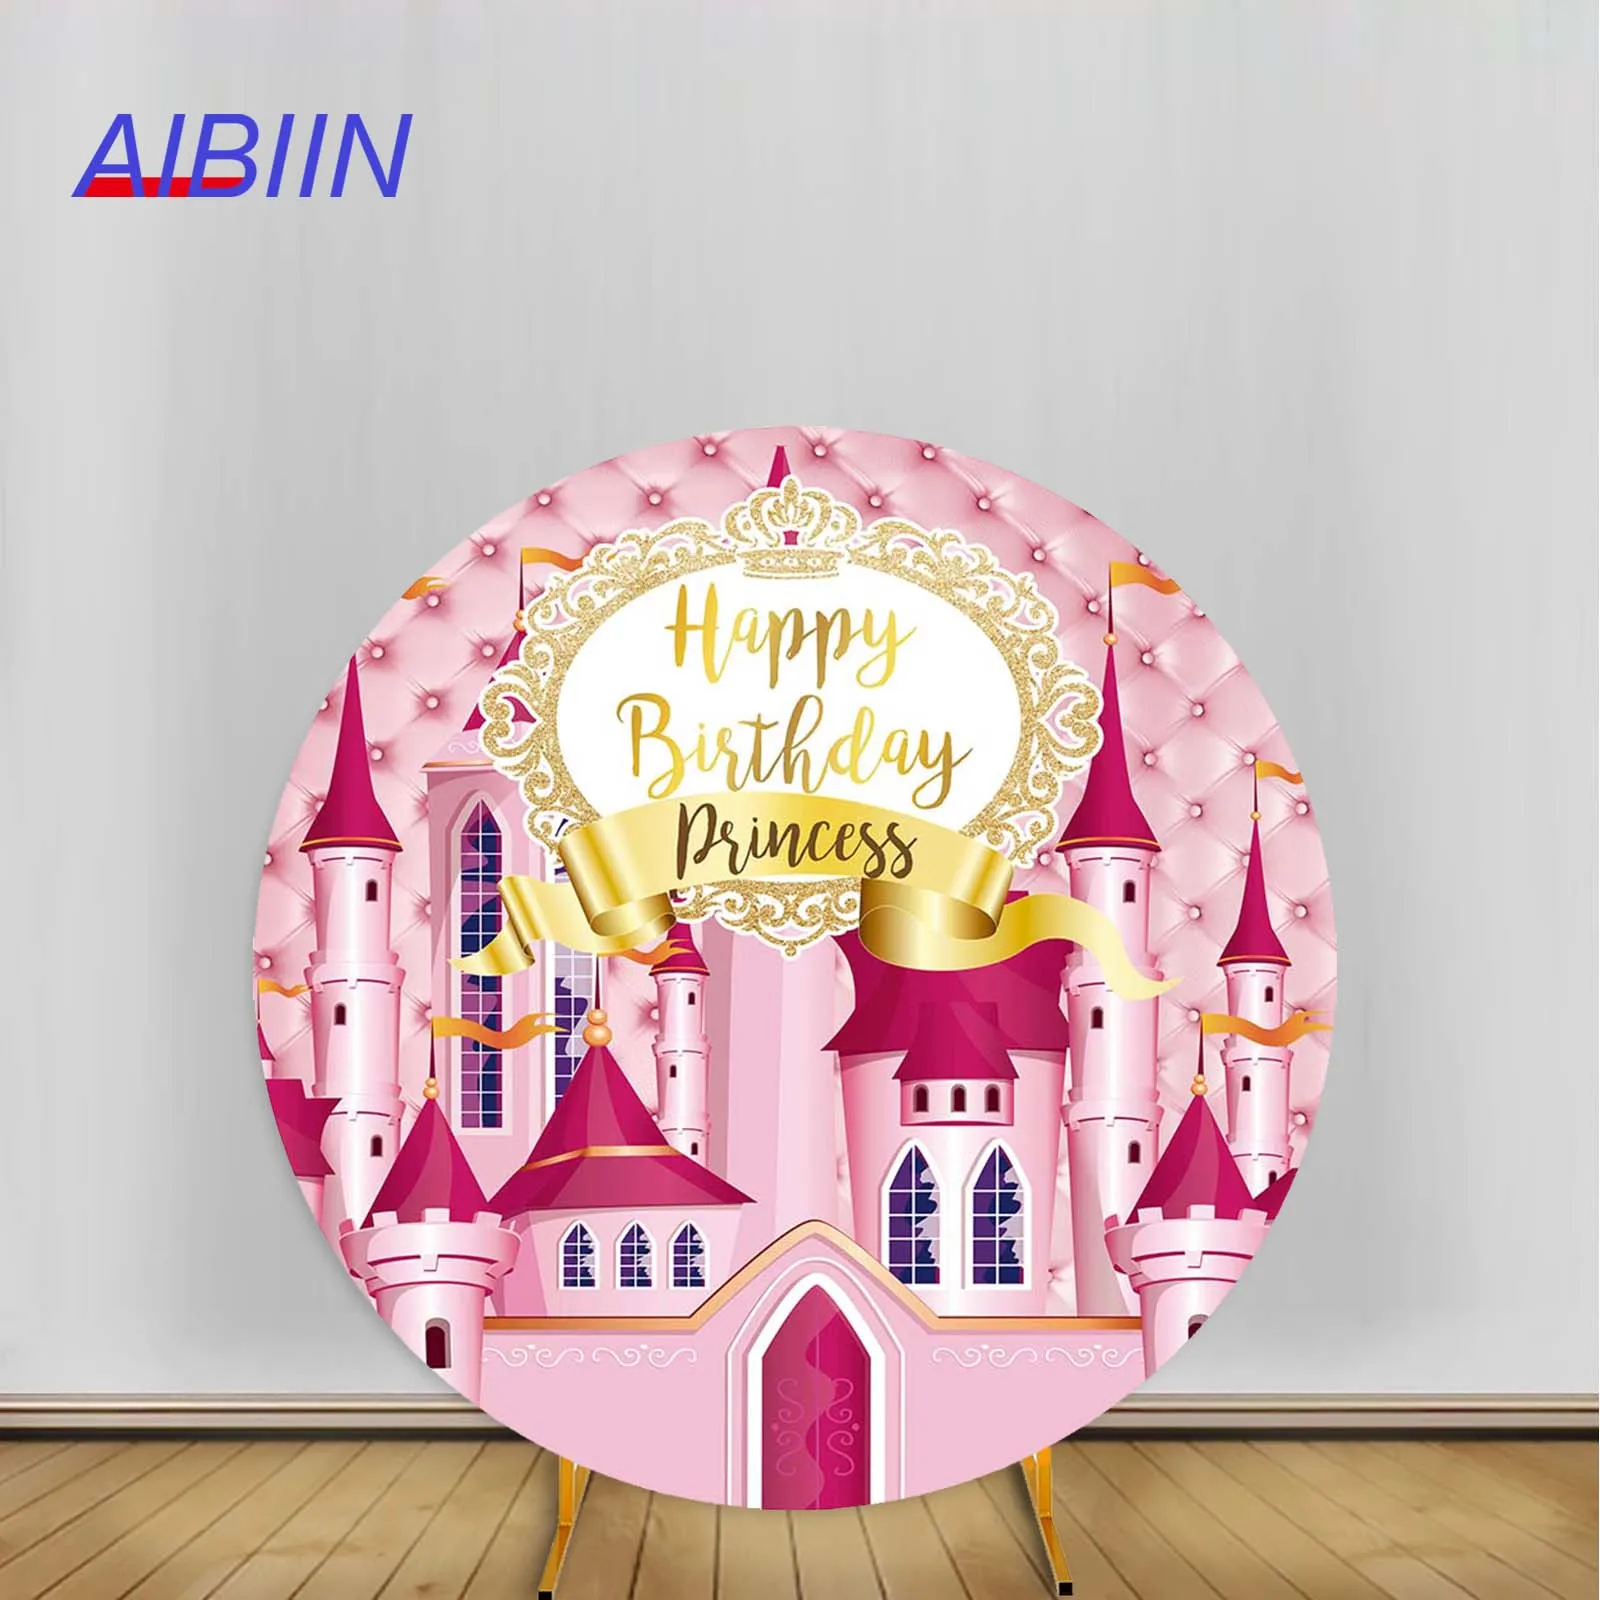 

AIBIIN Round Arch Backdrop Cover Pink Castle Princess Girl Happy Birthday Party Decor Cake Photography Background Photozone